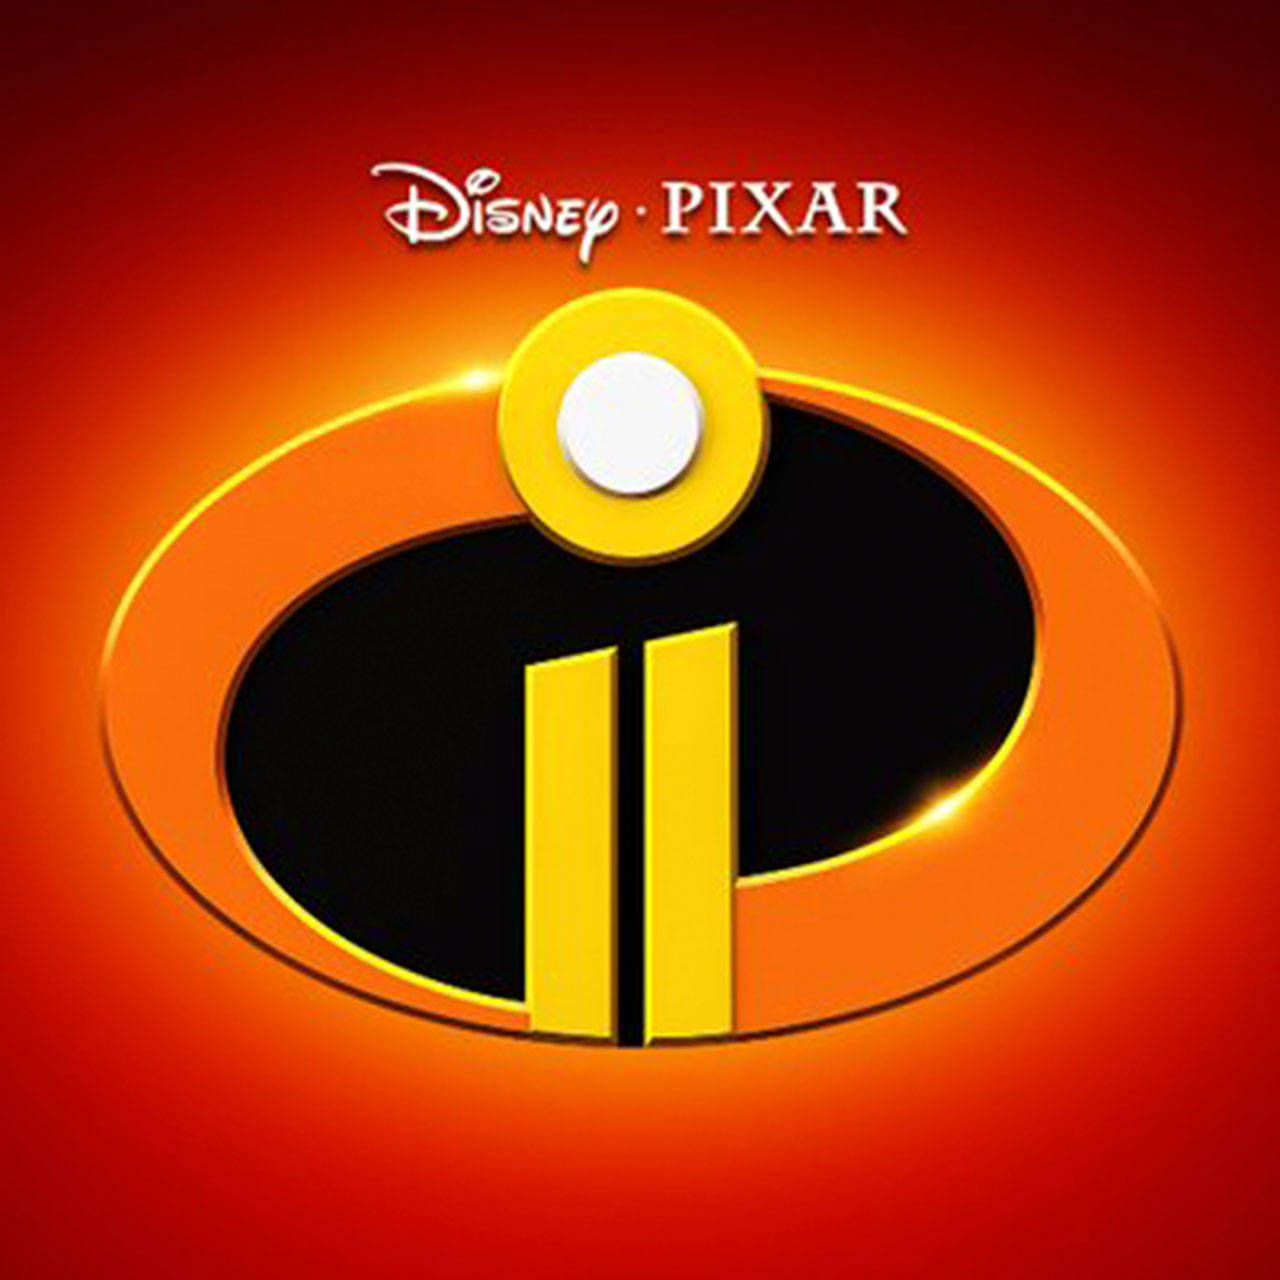 Image courtesy of Walt Disney Pictures | Bainbridge Cinemas will screen an early premiere of the latest Disney/Pixar film, “Incredibles 2,” at 6 p.m. Thursday, June 14.